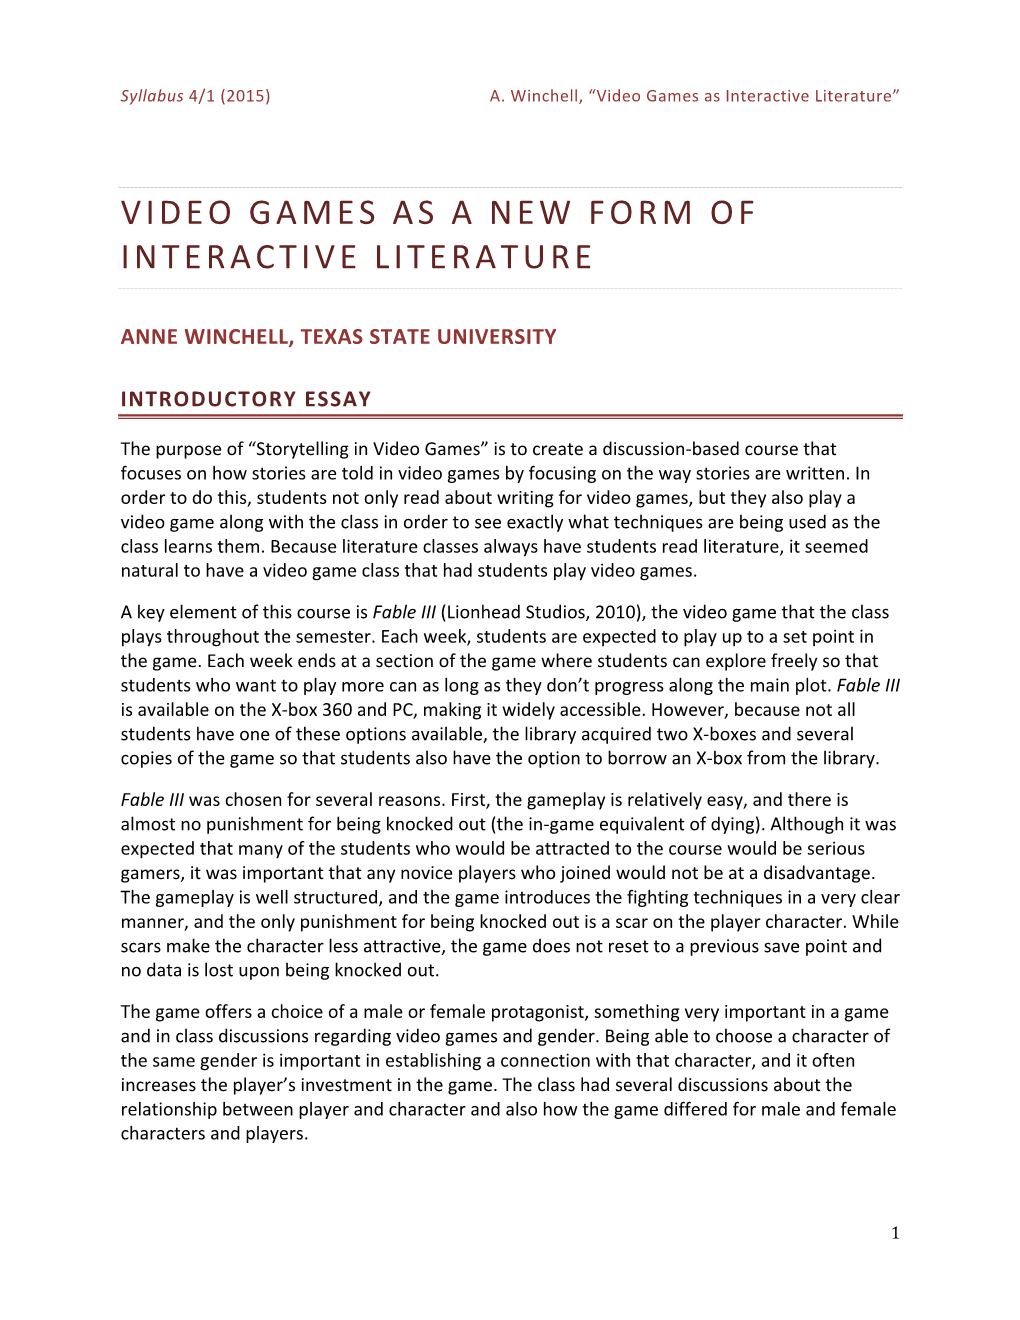 Video Games As a New Form of Interactive Literature